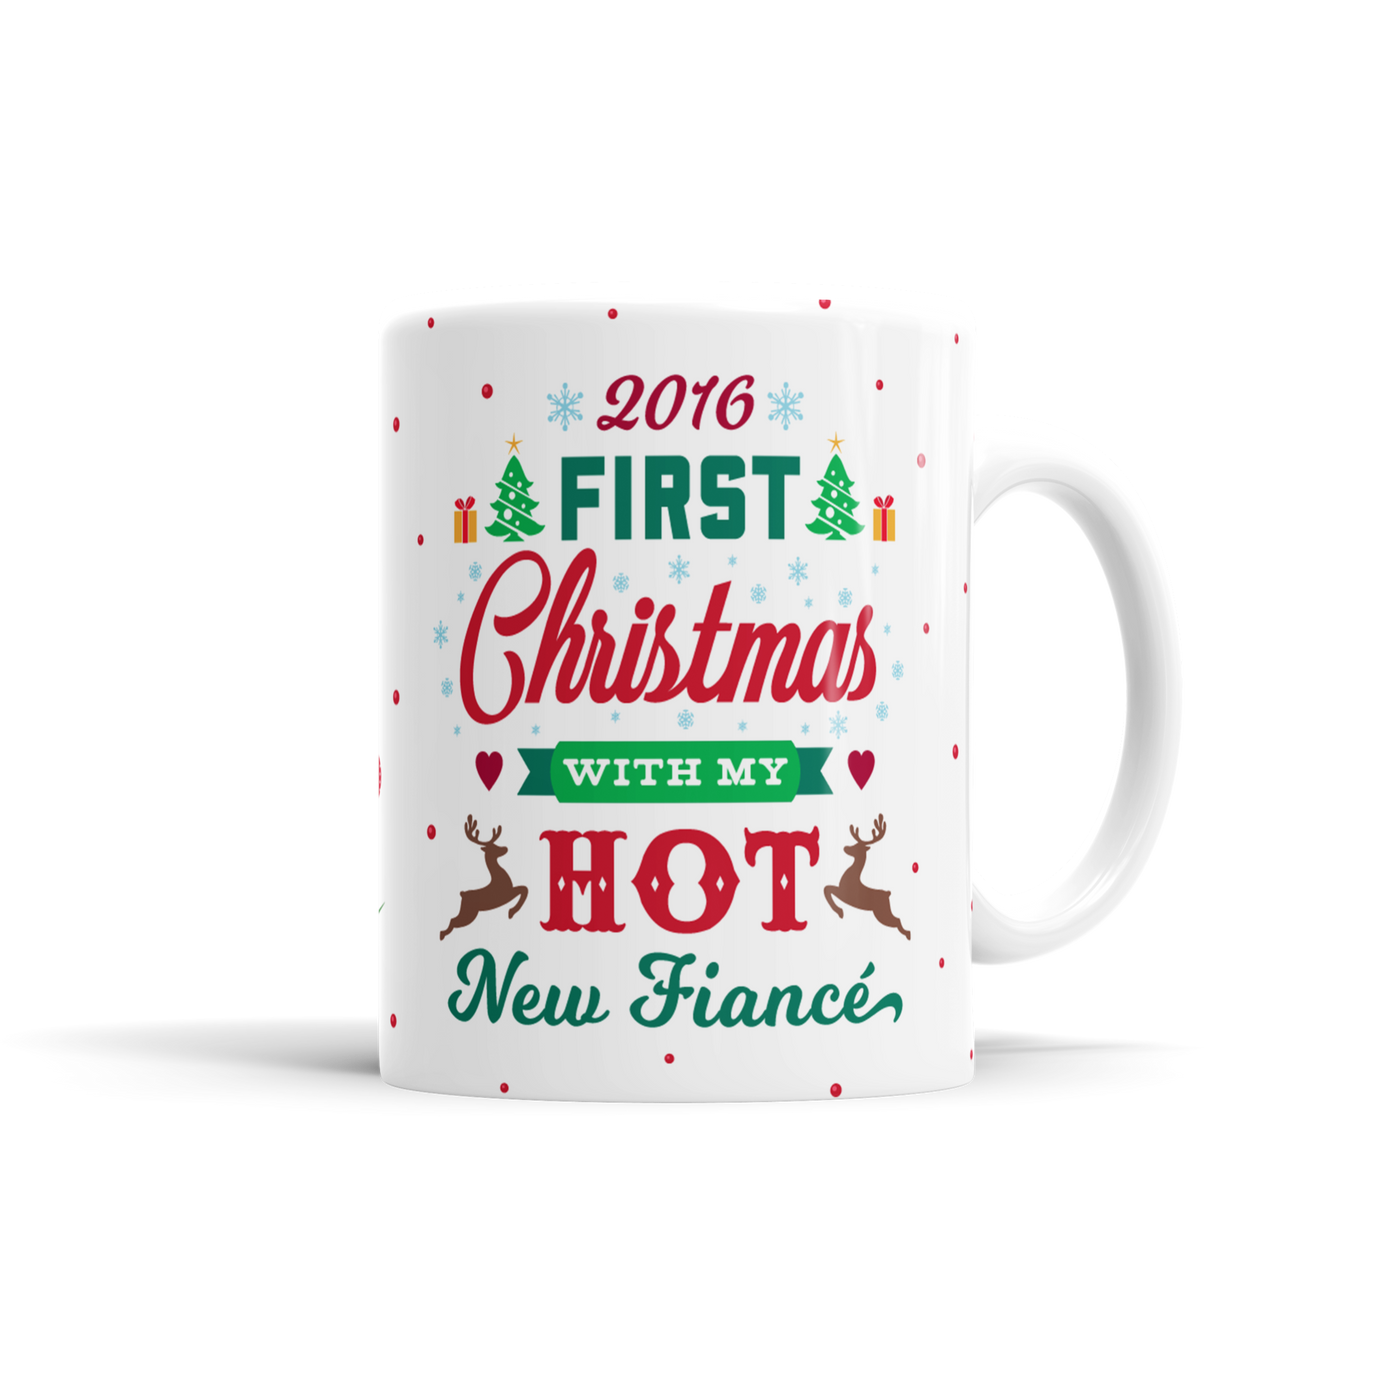 2016: First Christmas With My Hot, New Fiance